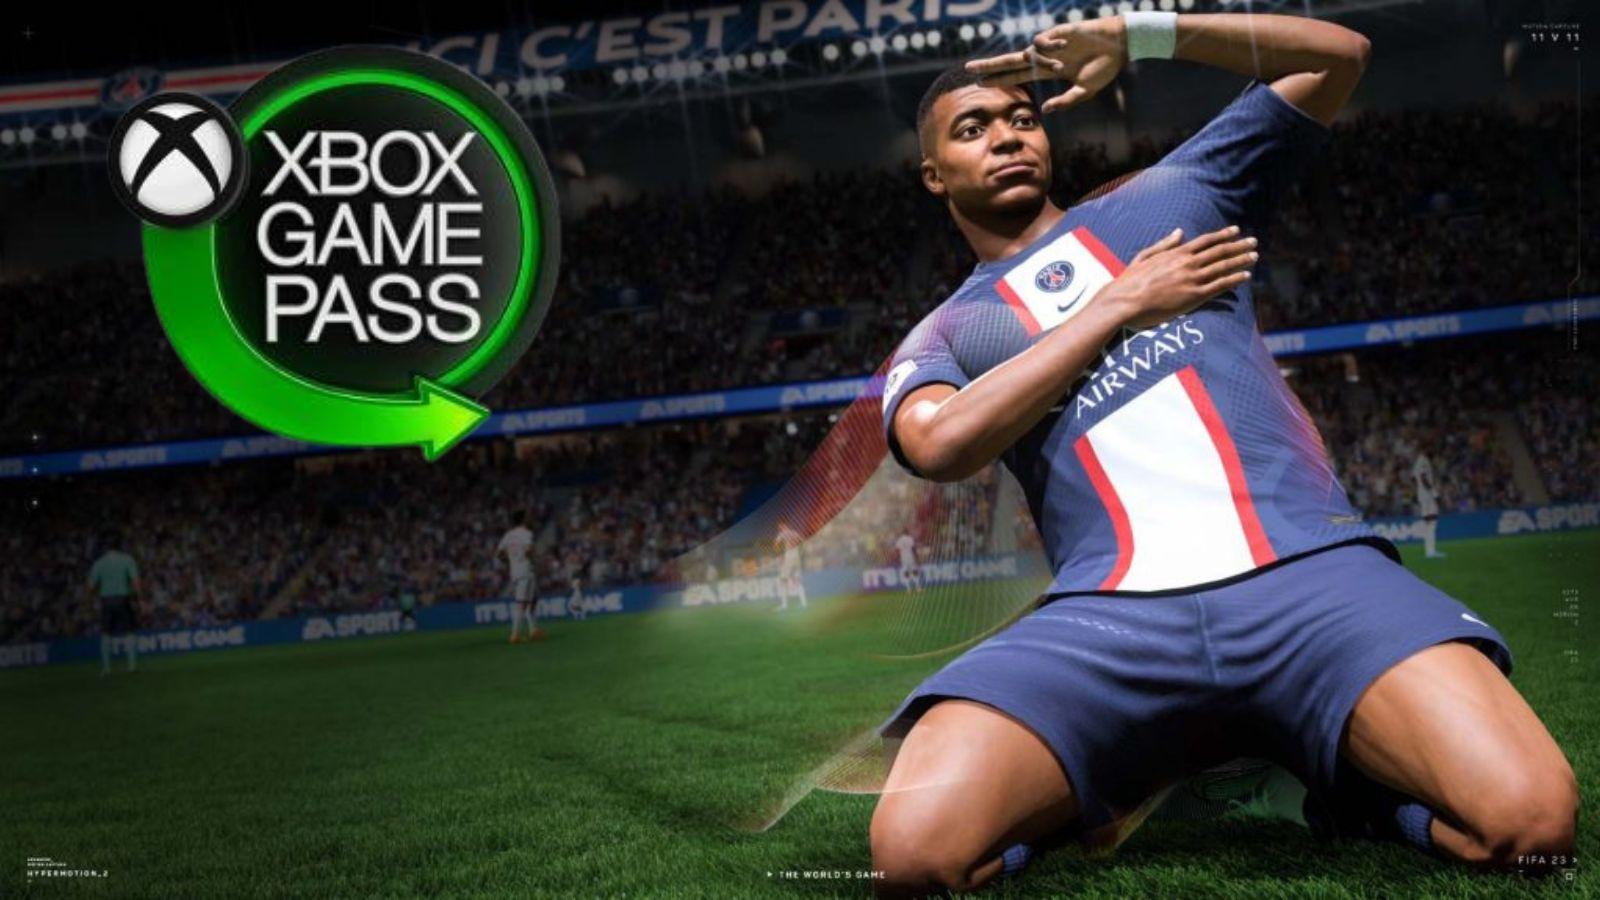 Does FIFA 23 on XBOX Game Pass WORK on BOOSTEROID? 